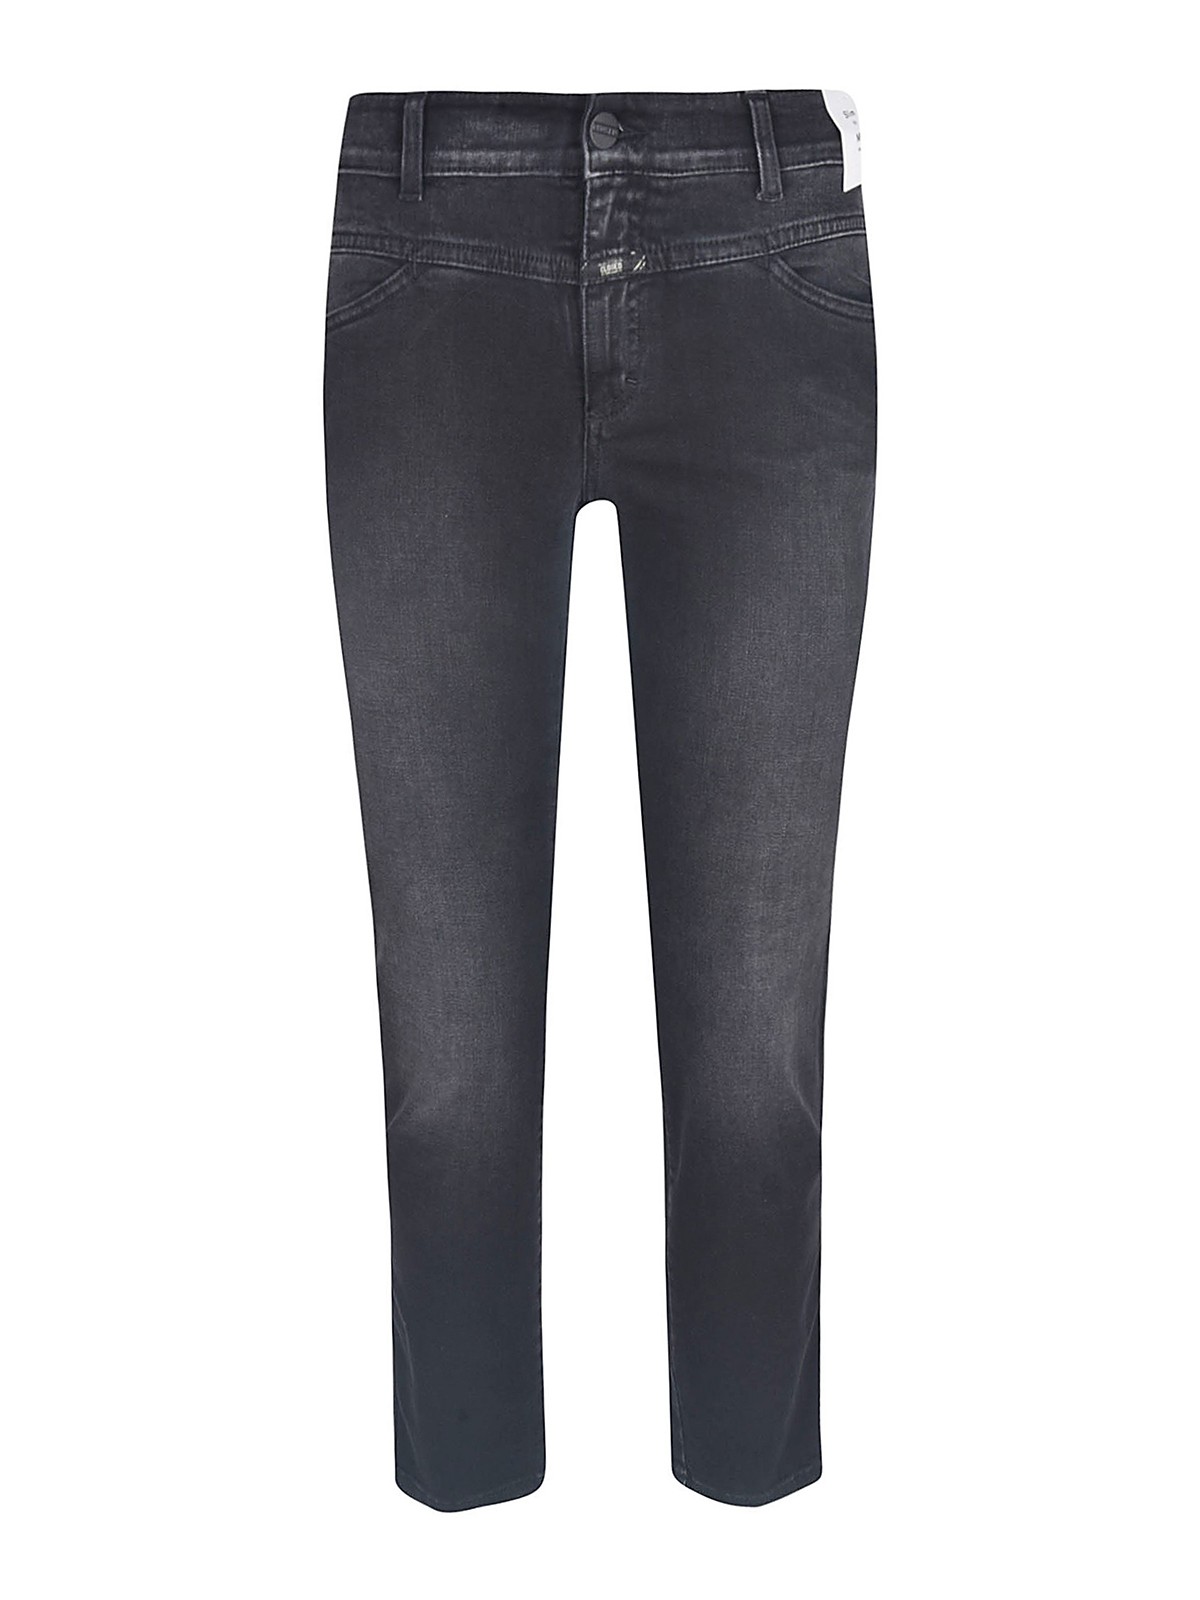 Skinny jeans Closed - Pedal Queen jeans - C9131503Z3EDGY | iKRIX.com